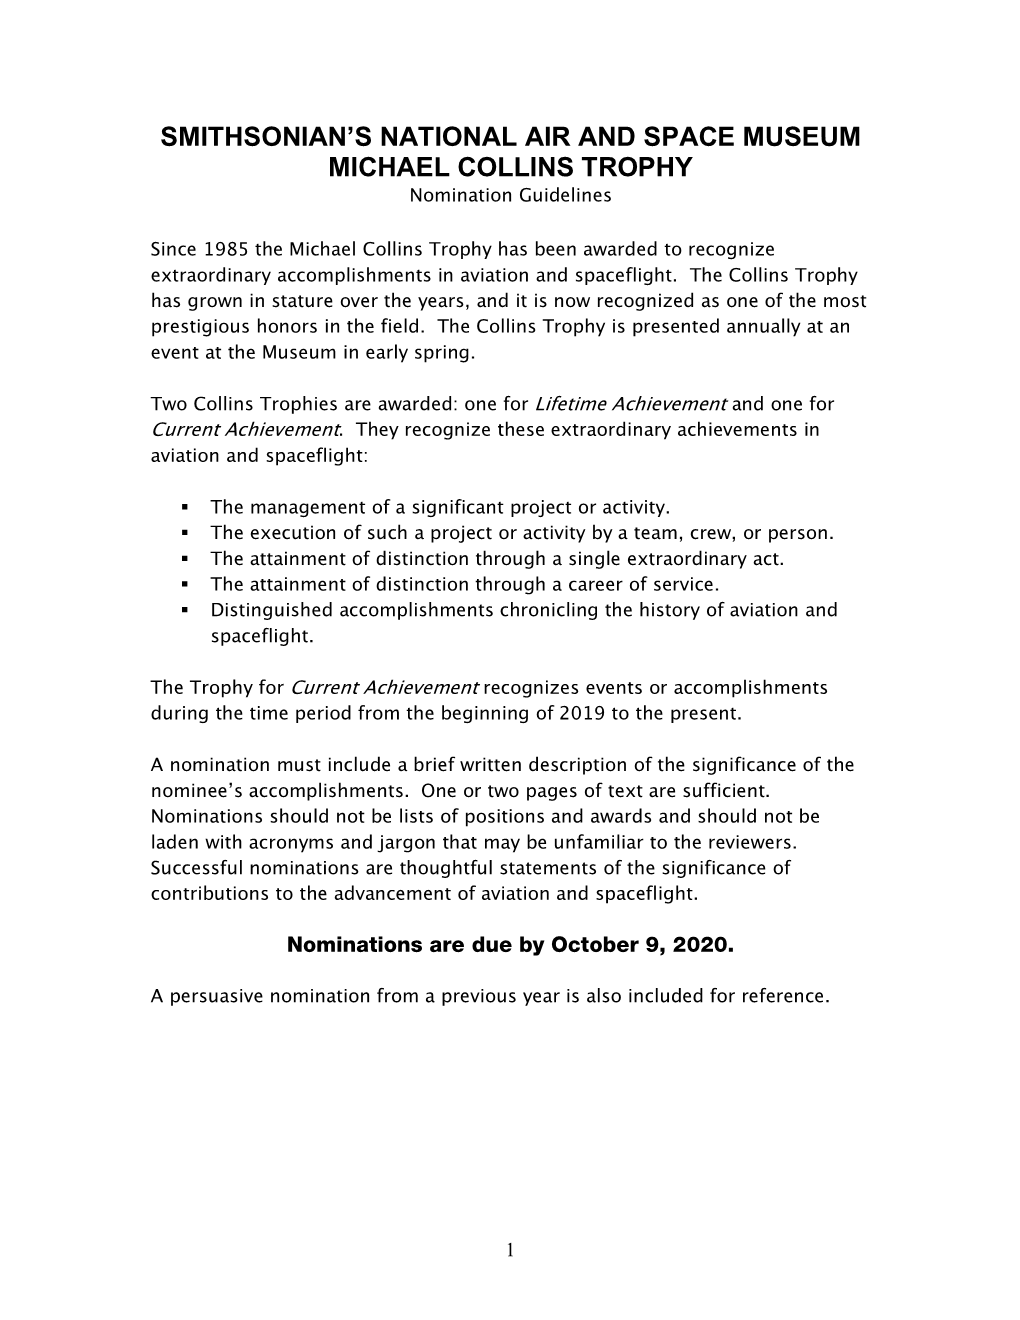 Guidelines for Applying Ofr the Michael Collins Trophy